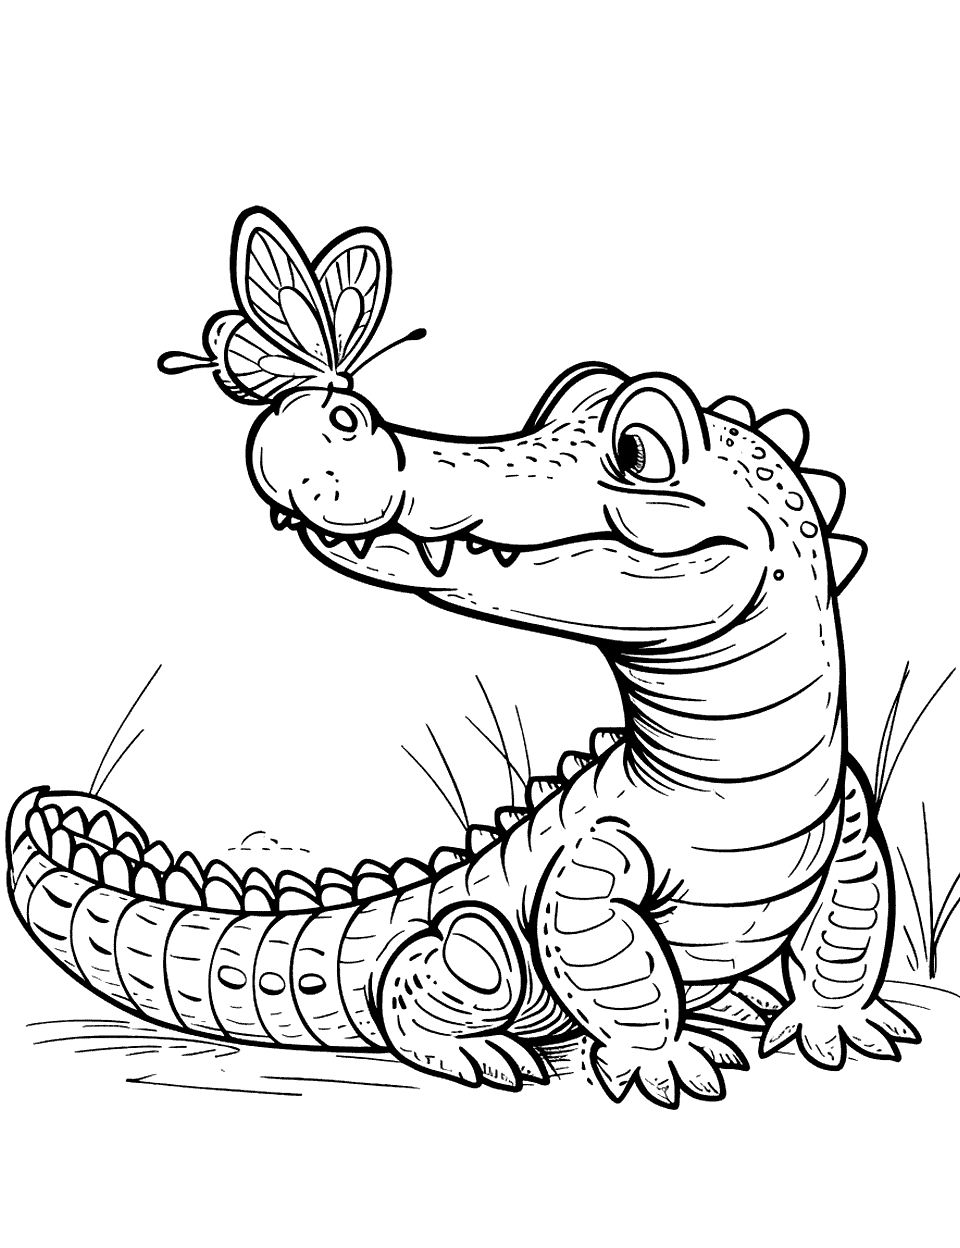 Alligator with a Butterfly Coloring Page - An alligator gently holding a butterfly on its nose.